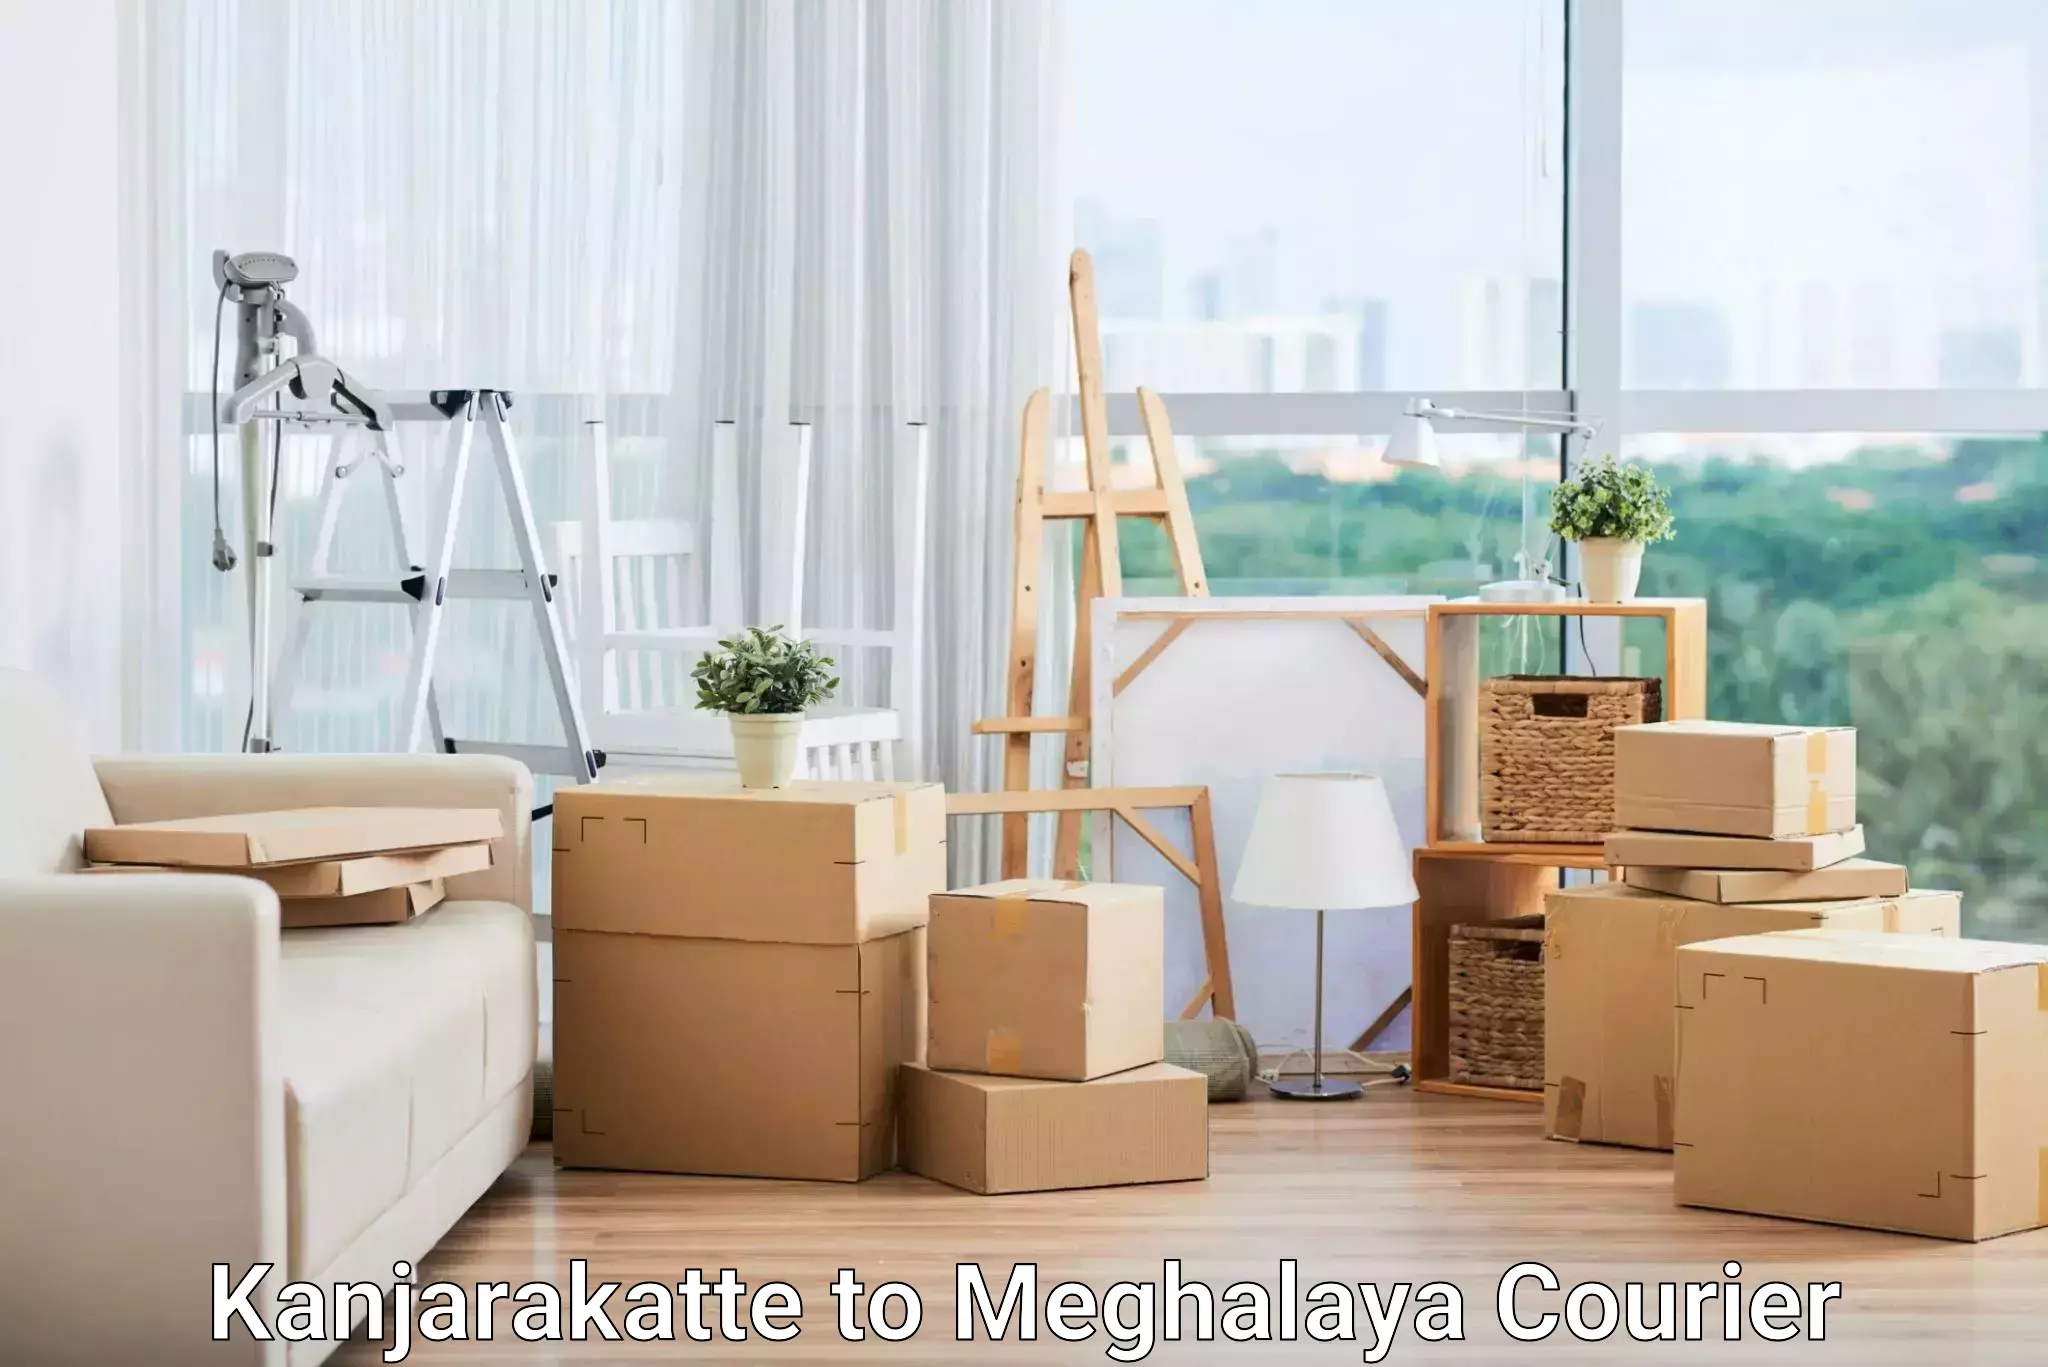 Easy access courier services Kanjarakatte to Meghalaya